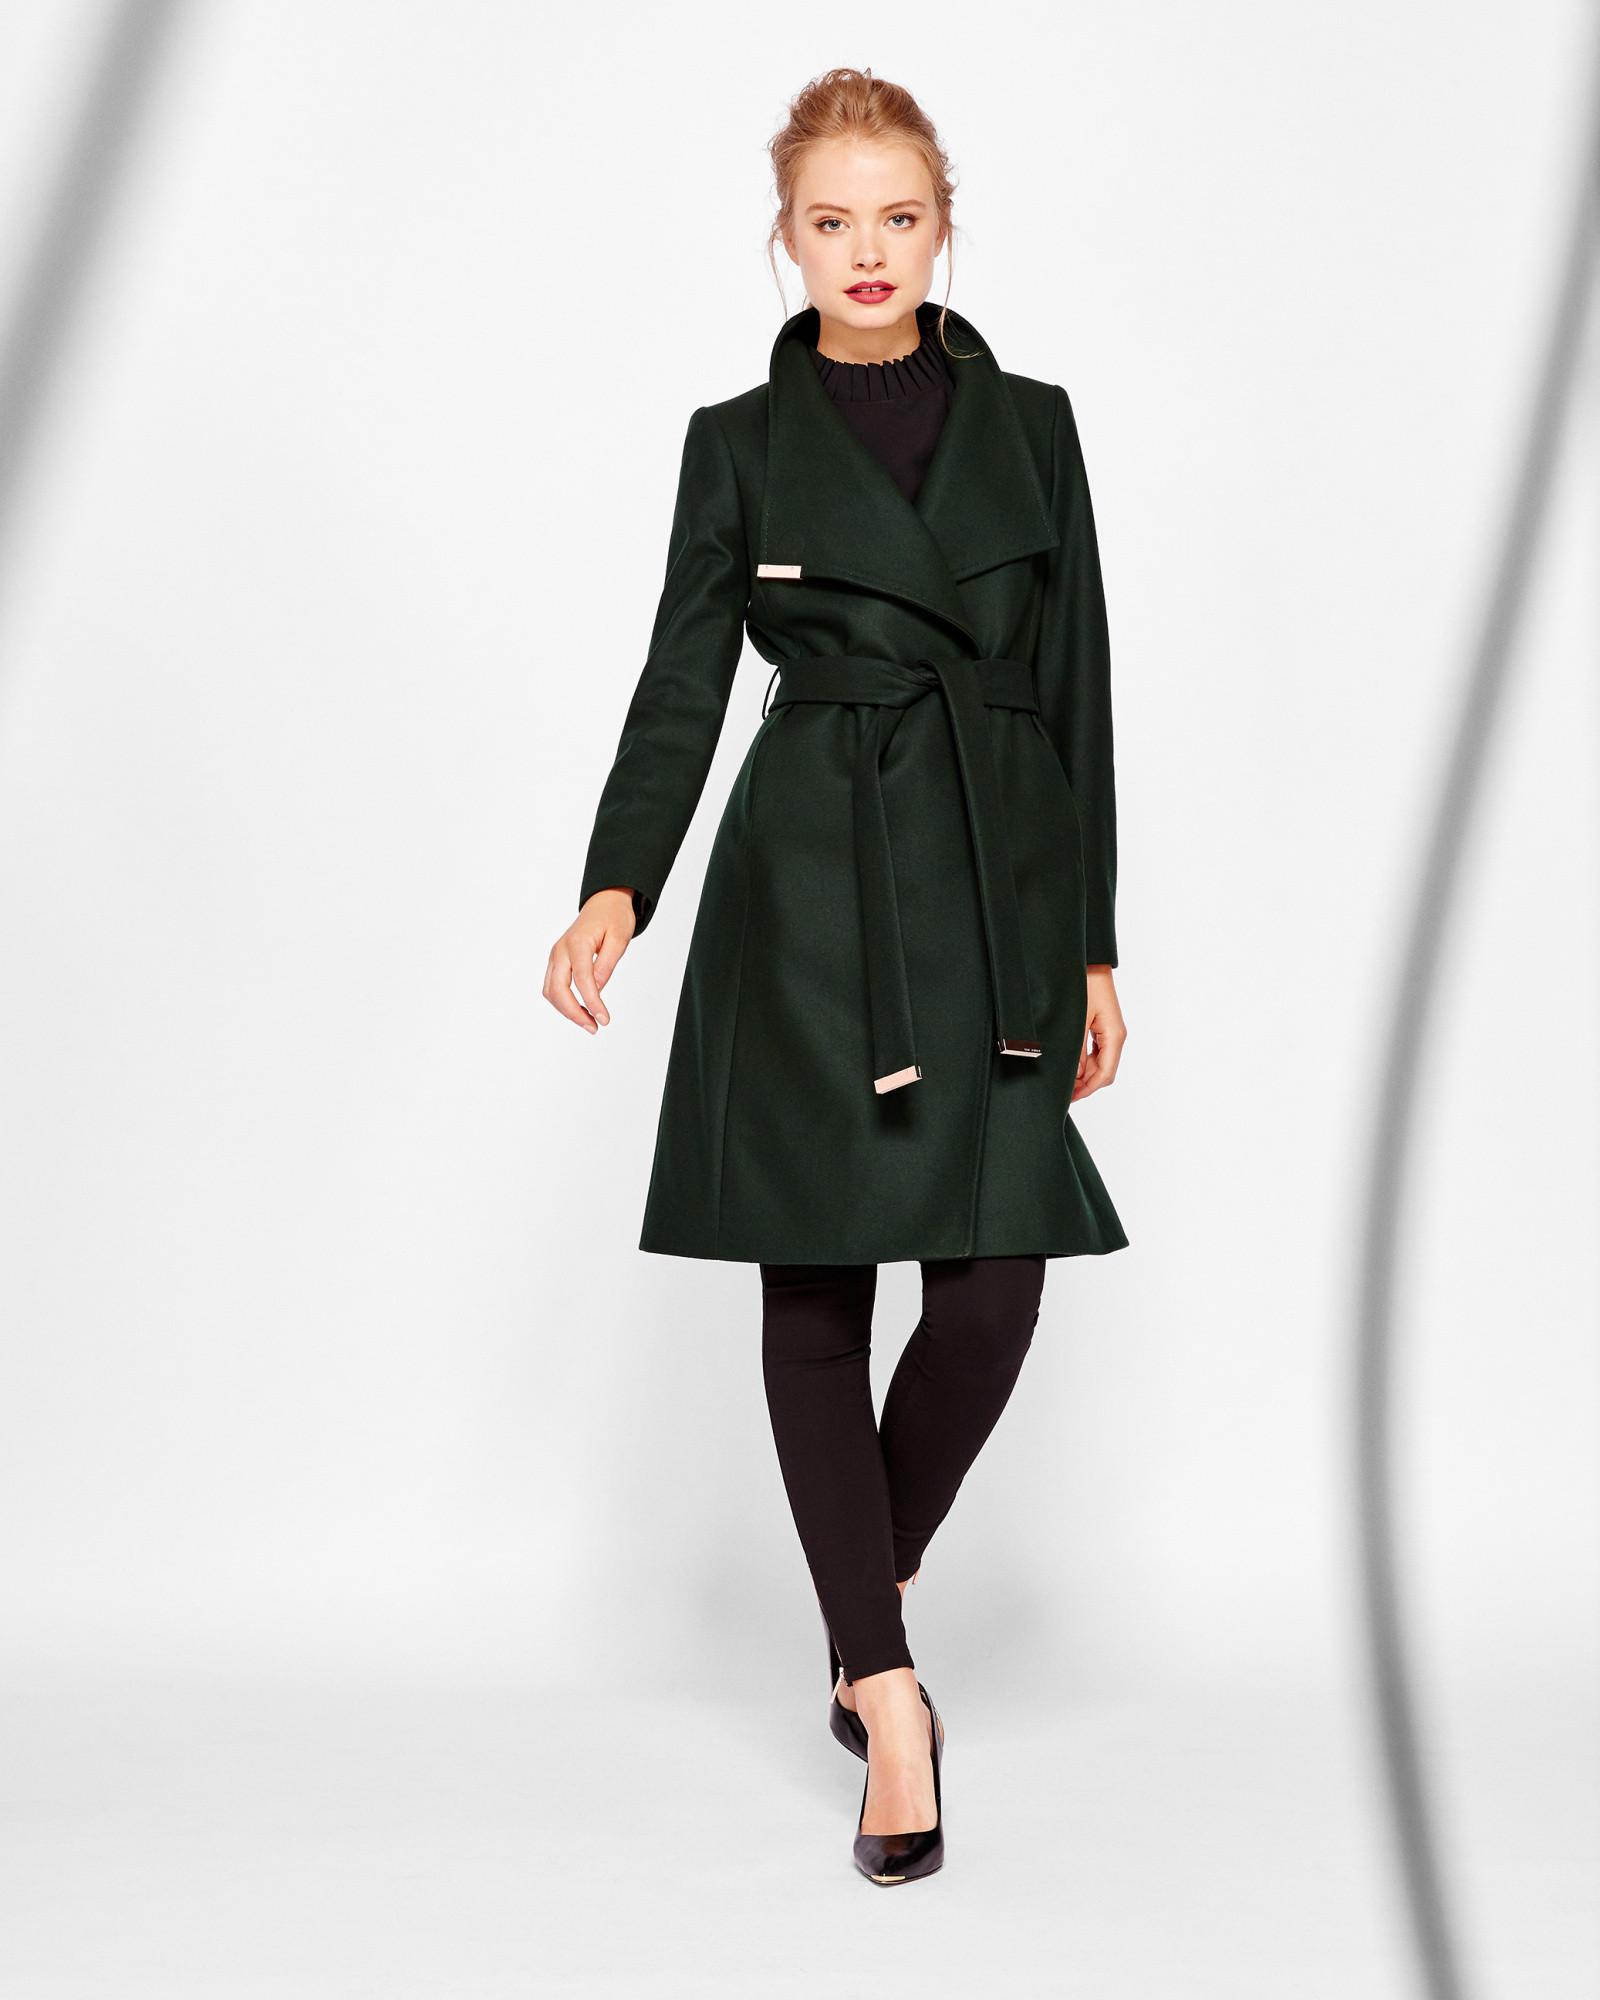 Ted Baker Cashmere-blend Wrap Front Coat in Dark Green (Green) - Lyst